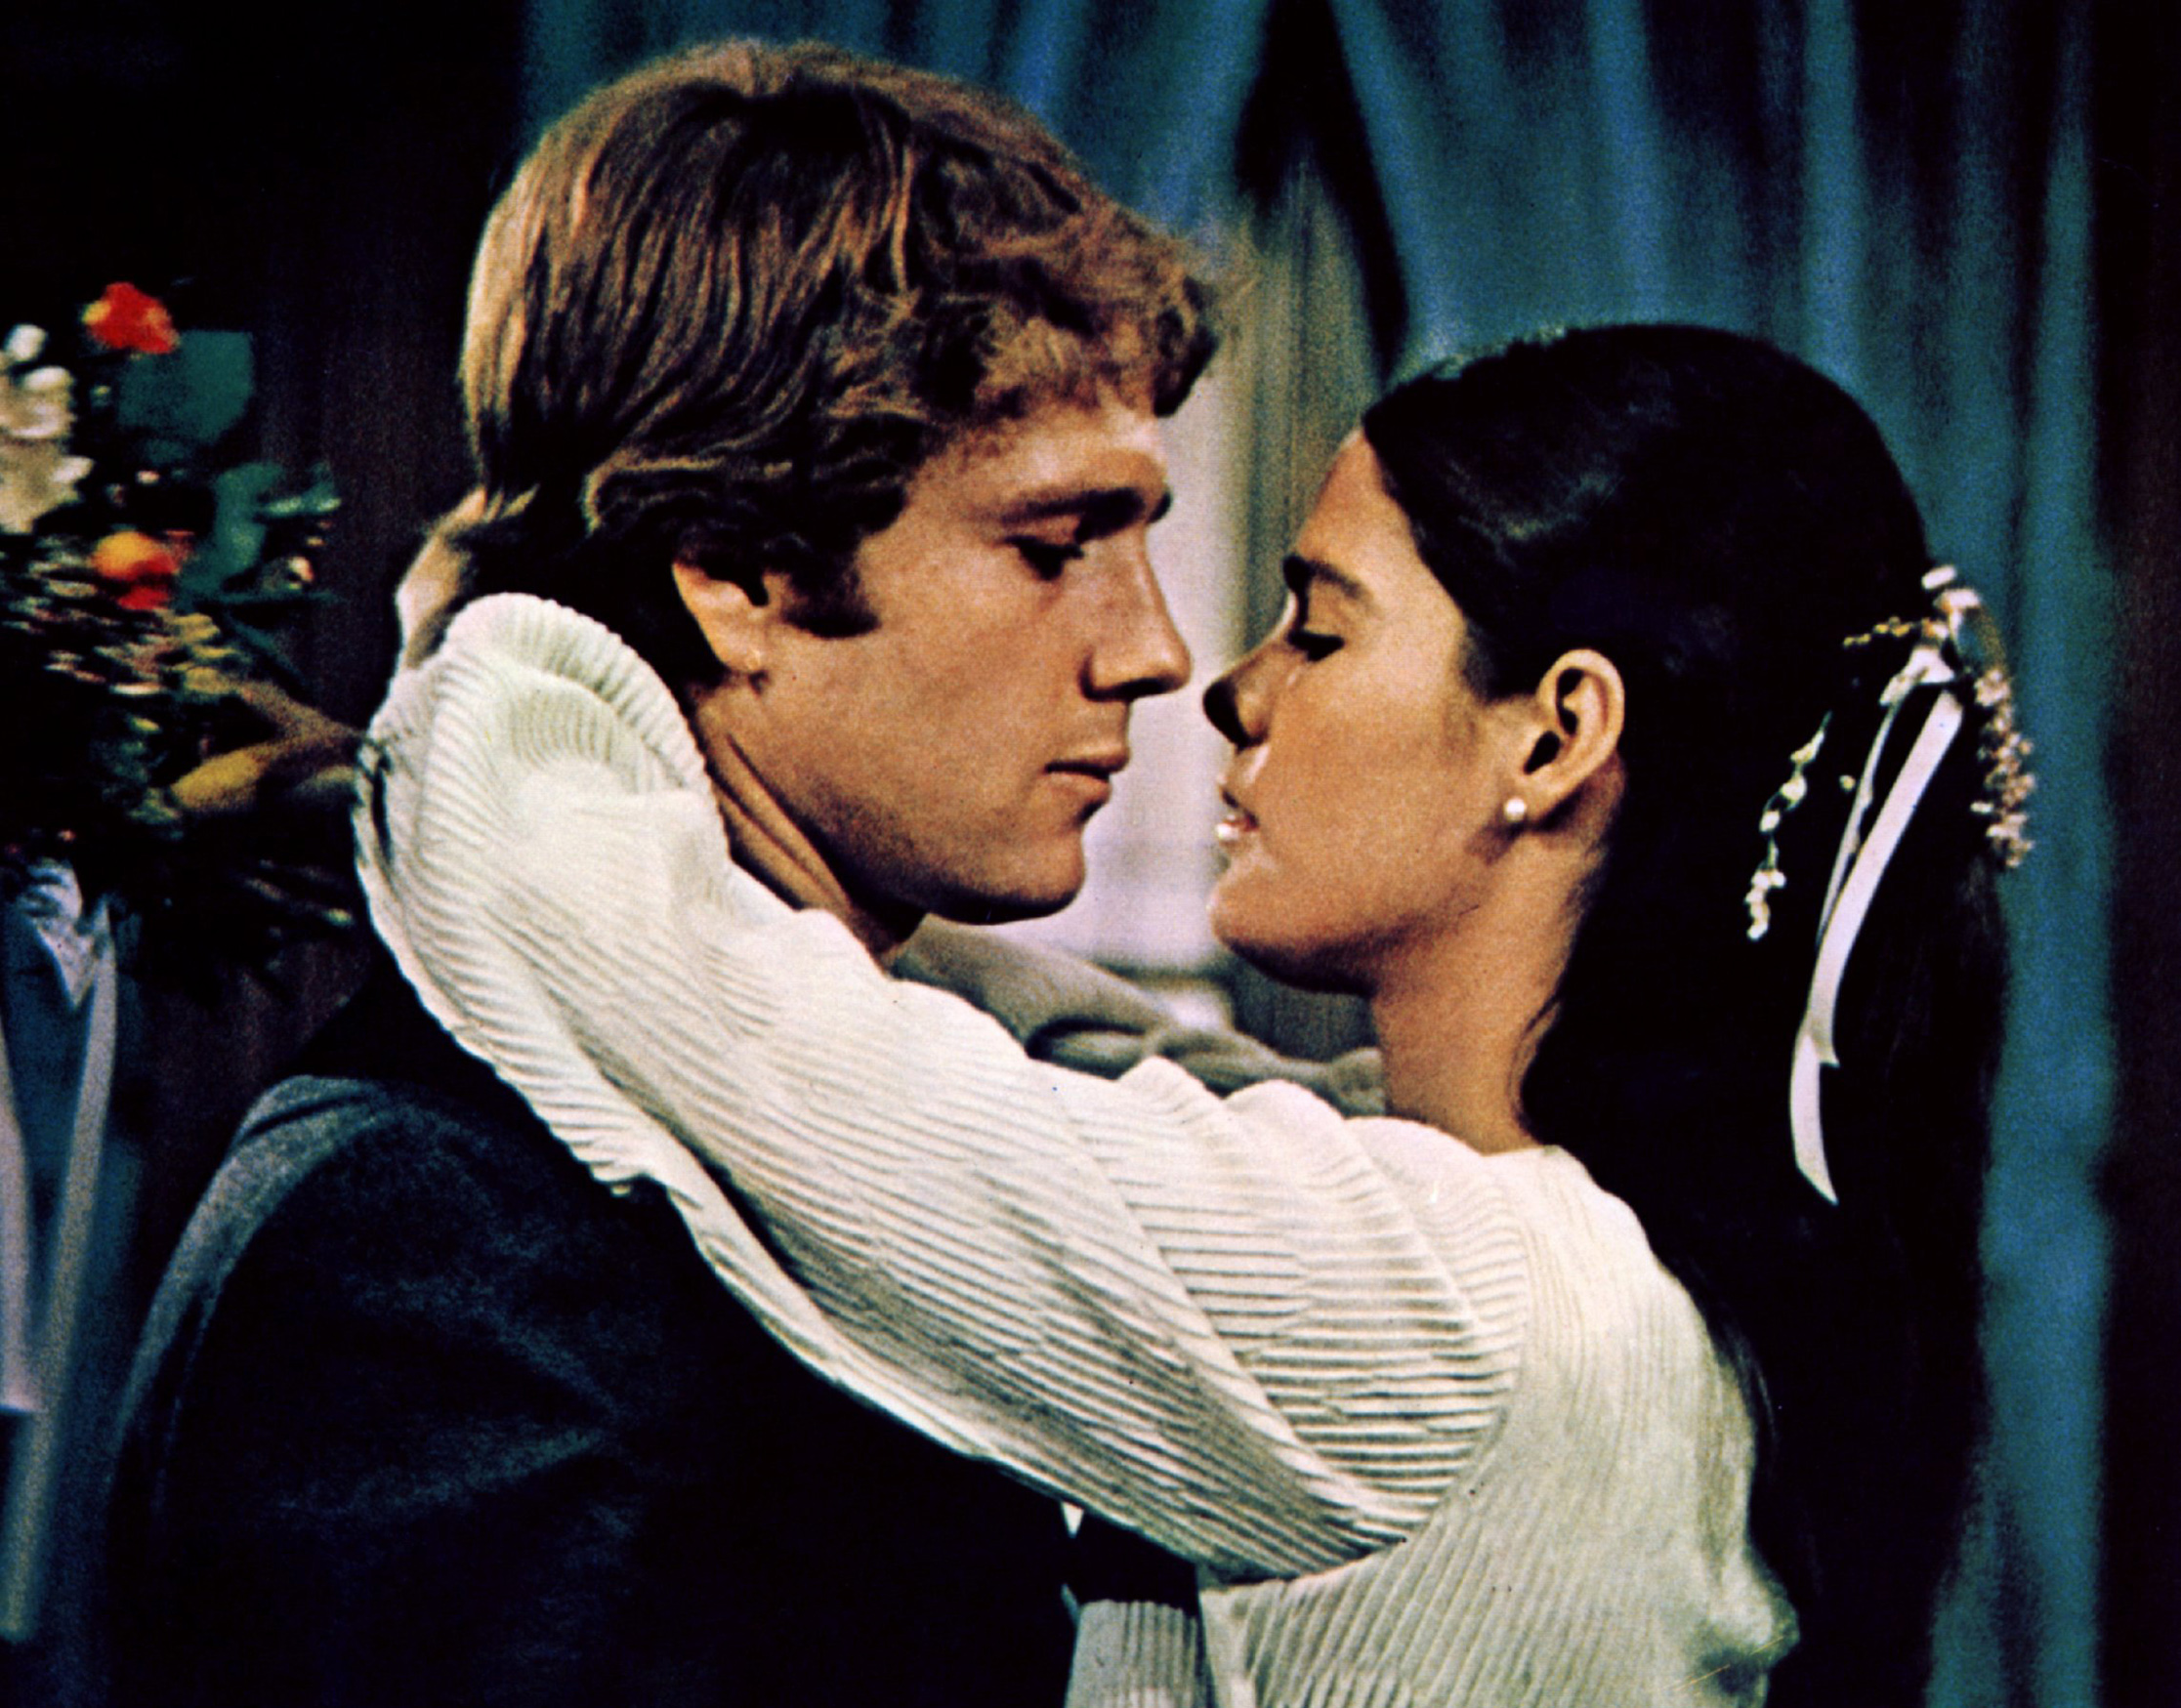 Ryan O'Neal and Ali MacGraw in a scene from the 1970 movie "Love Story." | Source: Getty Images